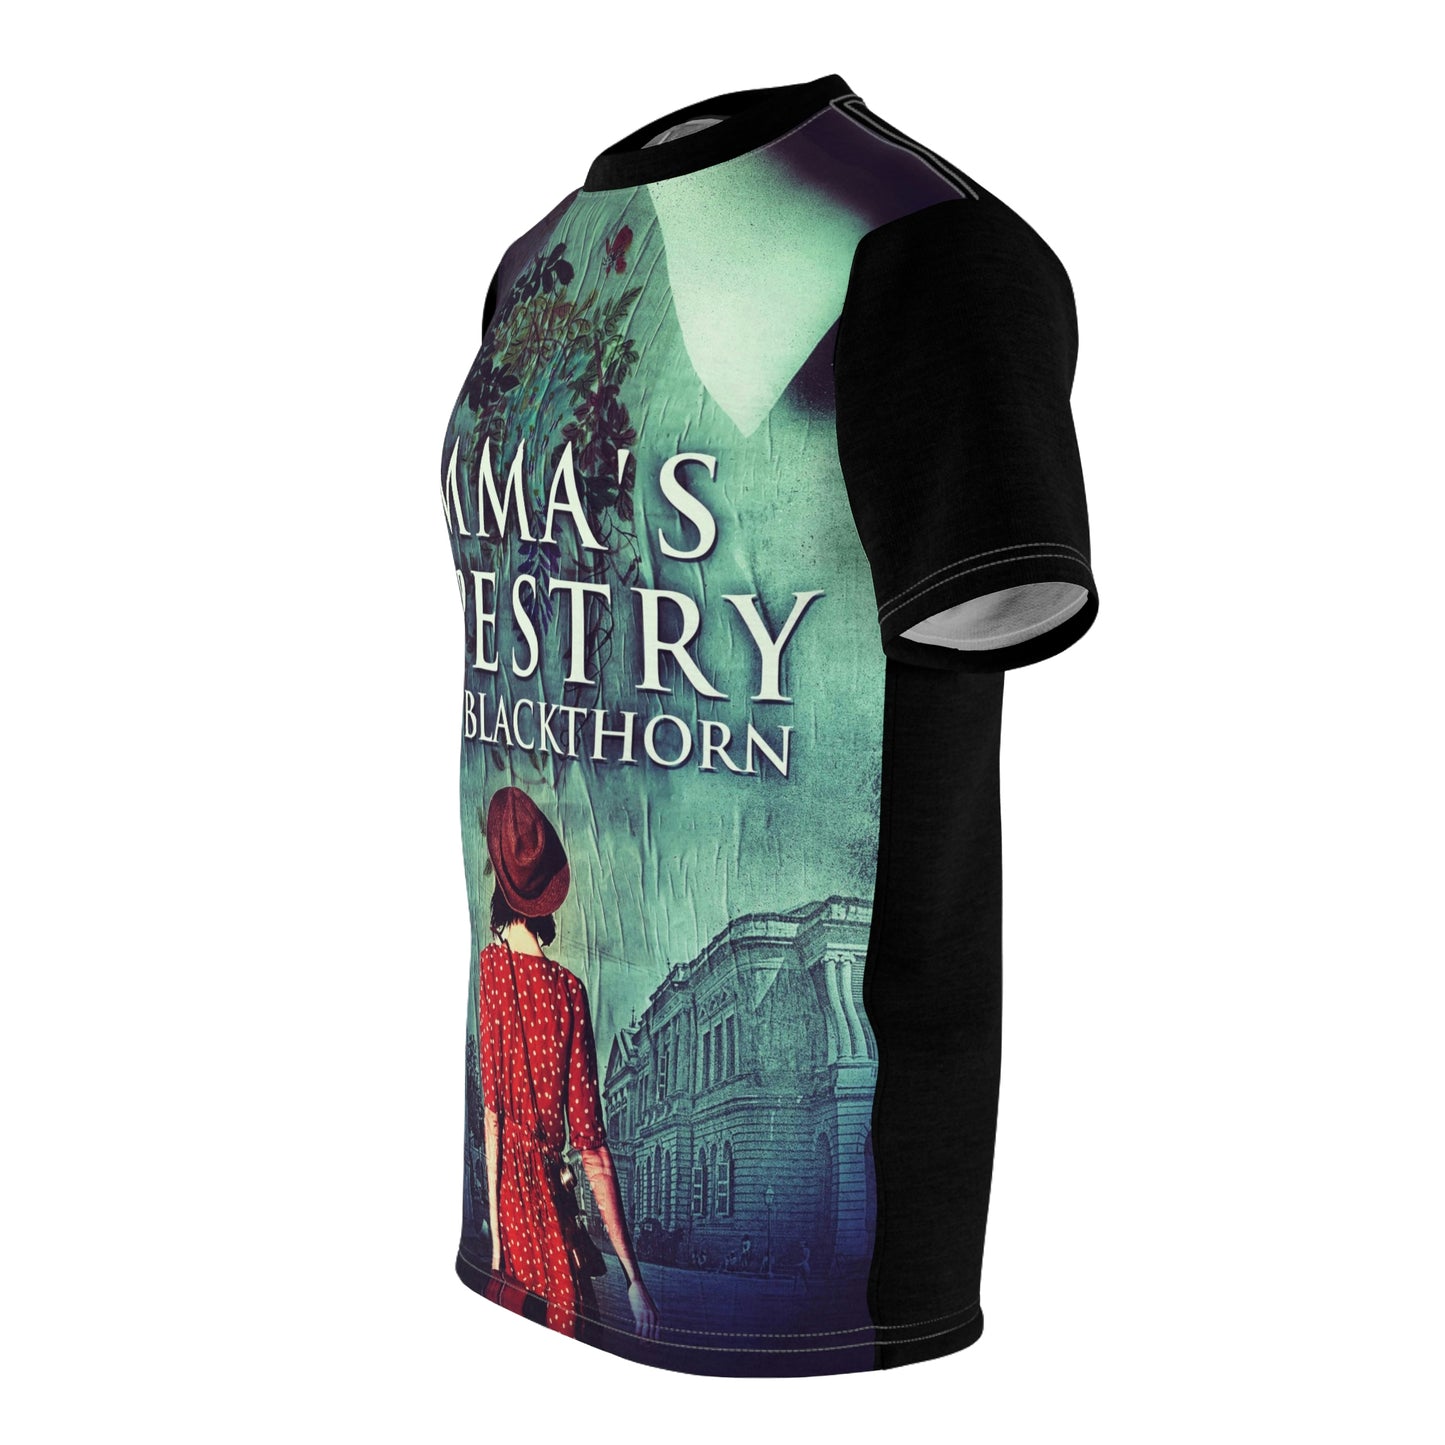 Emma's Tapestry - Unisex All-Over Print Cut & Sew T-Shirt